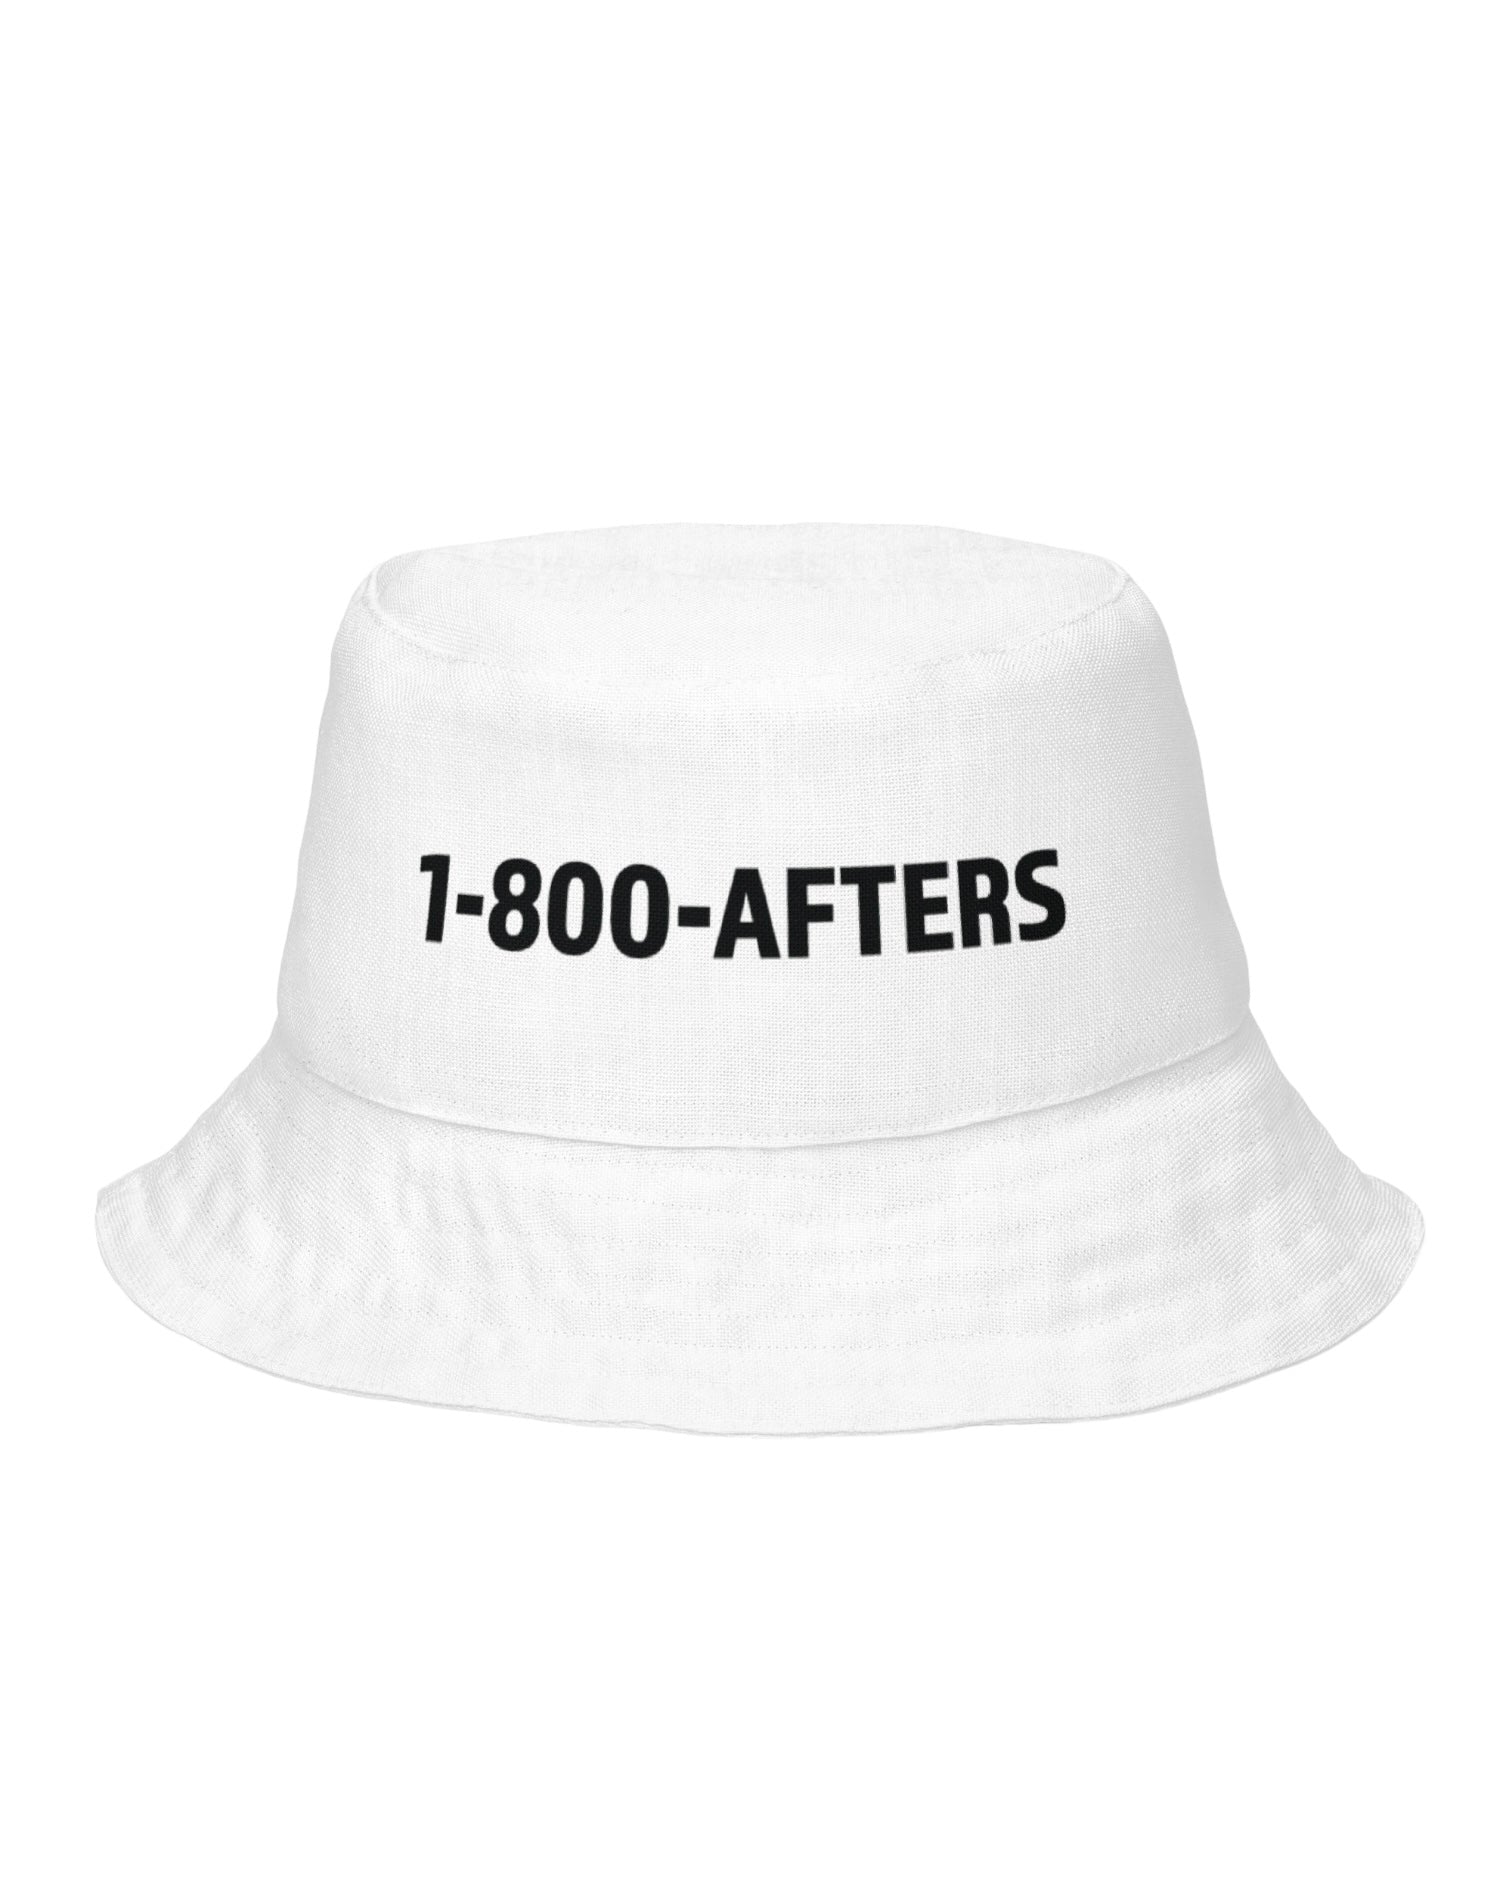 1-800-Afters Reversible Bucket Hat in White